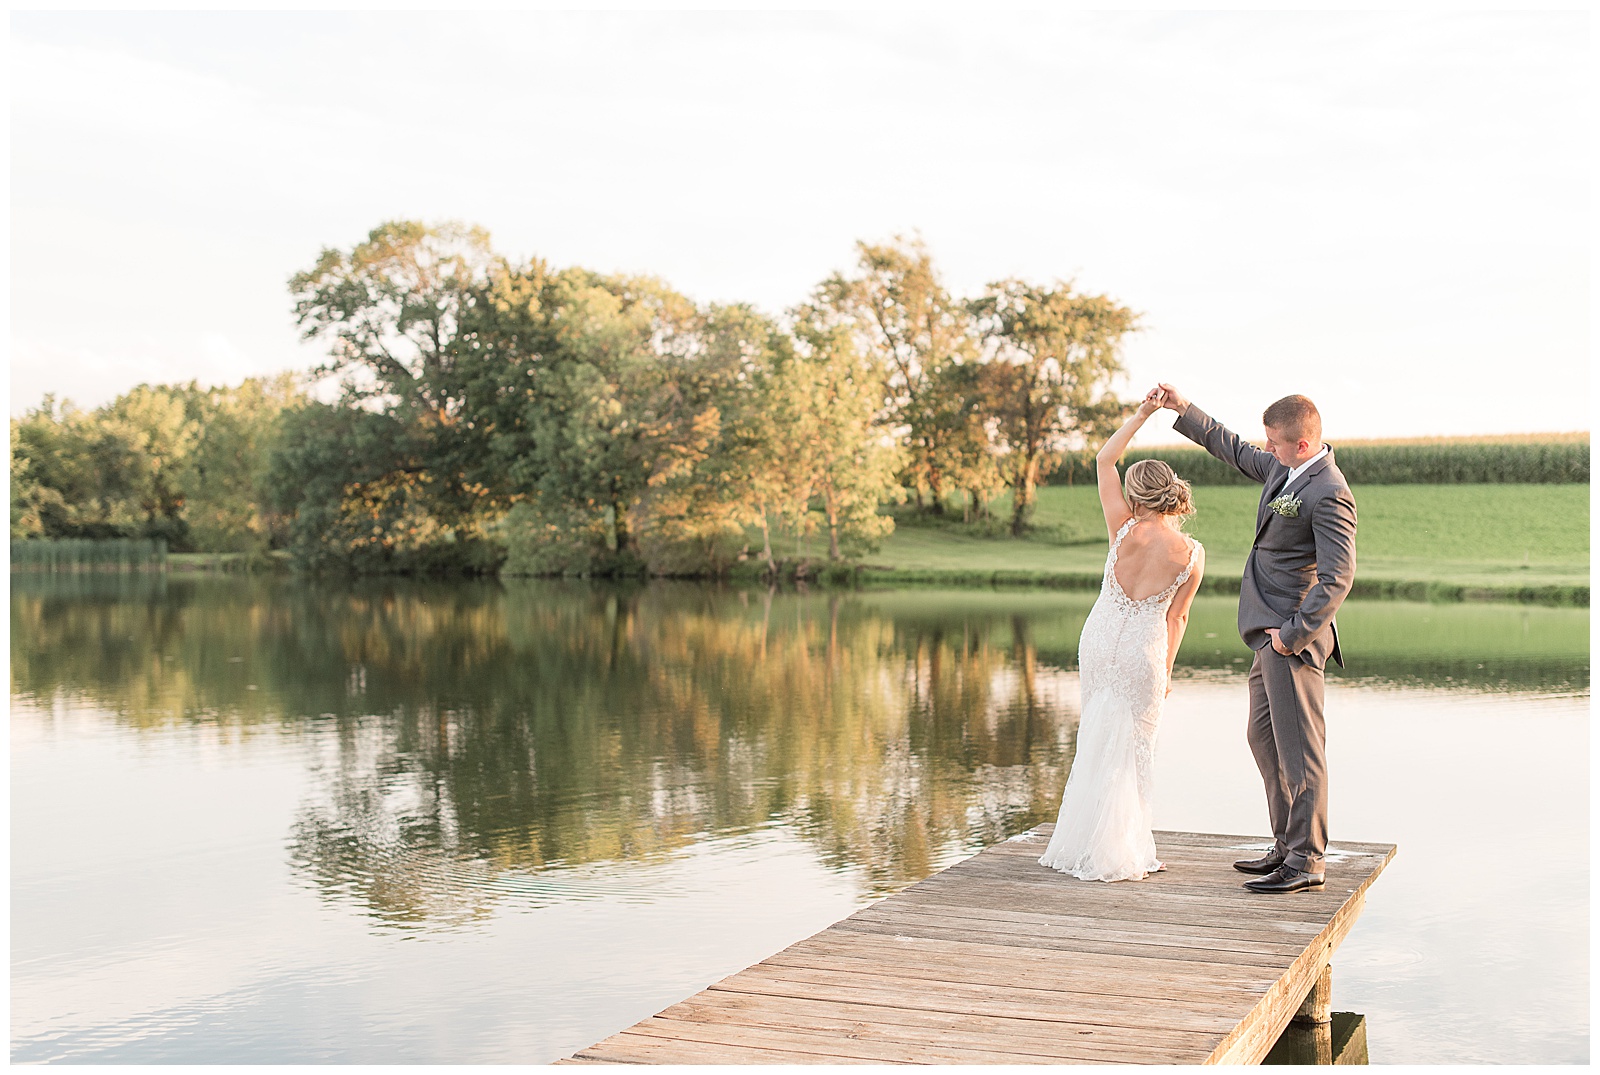 groom is twirling the bride under his right arm while holding her left hand at the end of the dock at the pond with the trees reflecting in the pond behind them on a sunny day at Lakefield Weddings in Manheim, PA